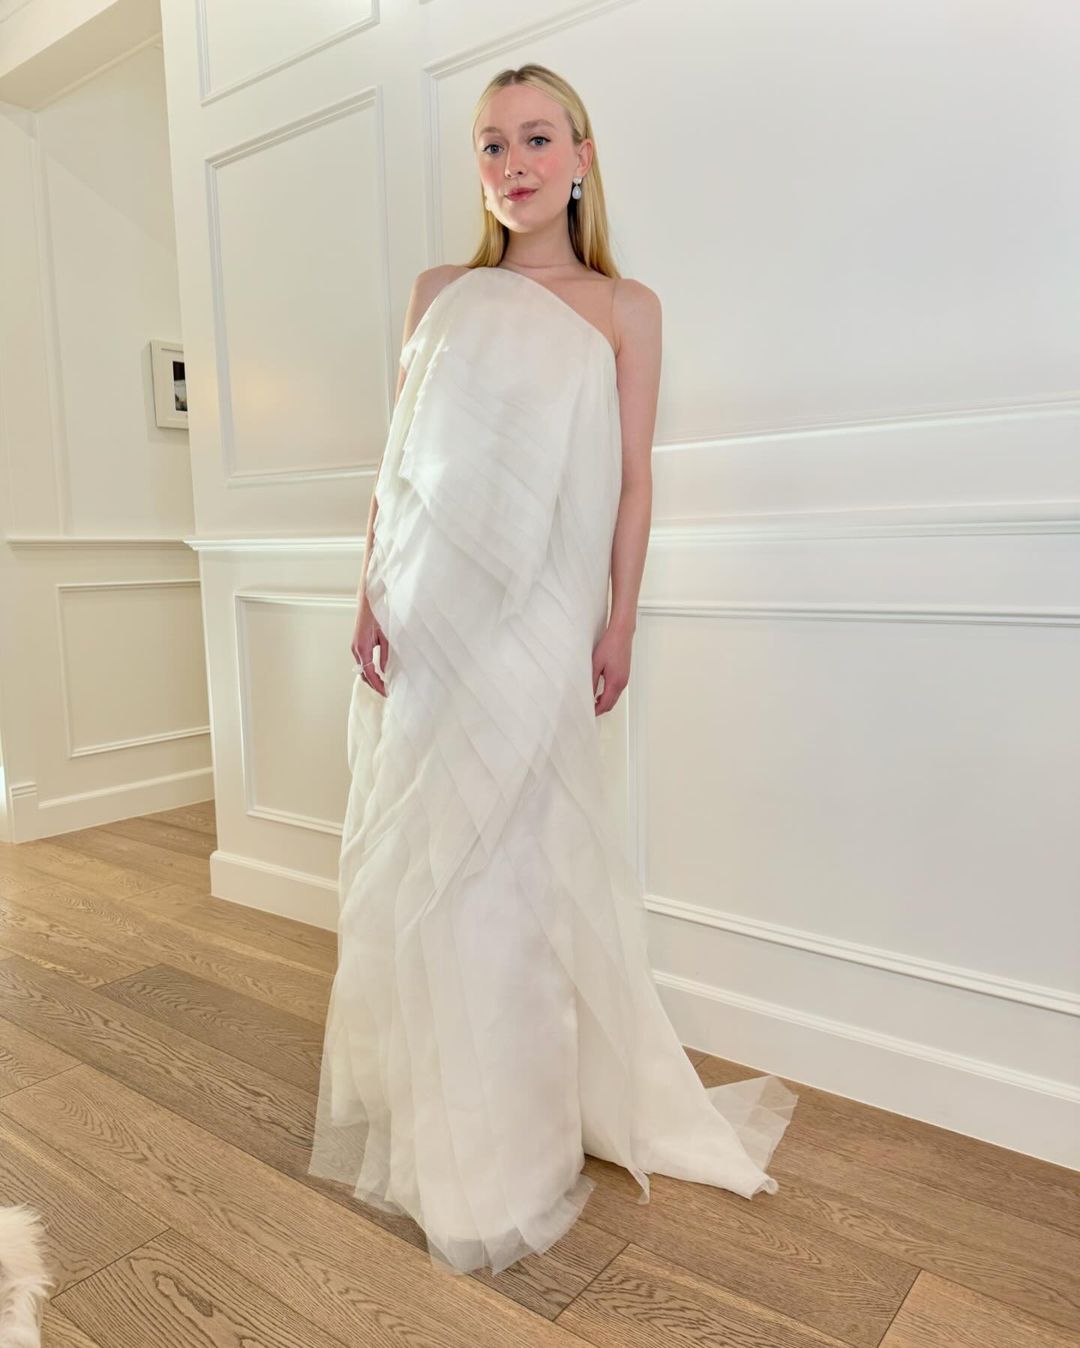 Dakota Fanning Puts Herself Back on the Fashion Map in Heavenly Couture